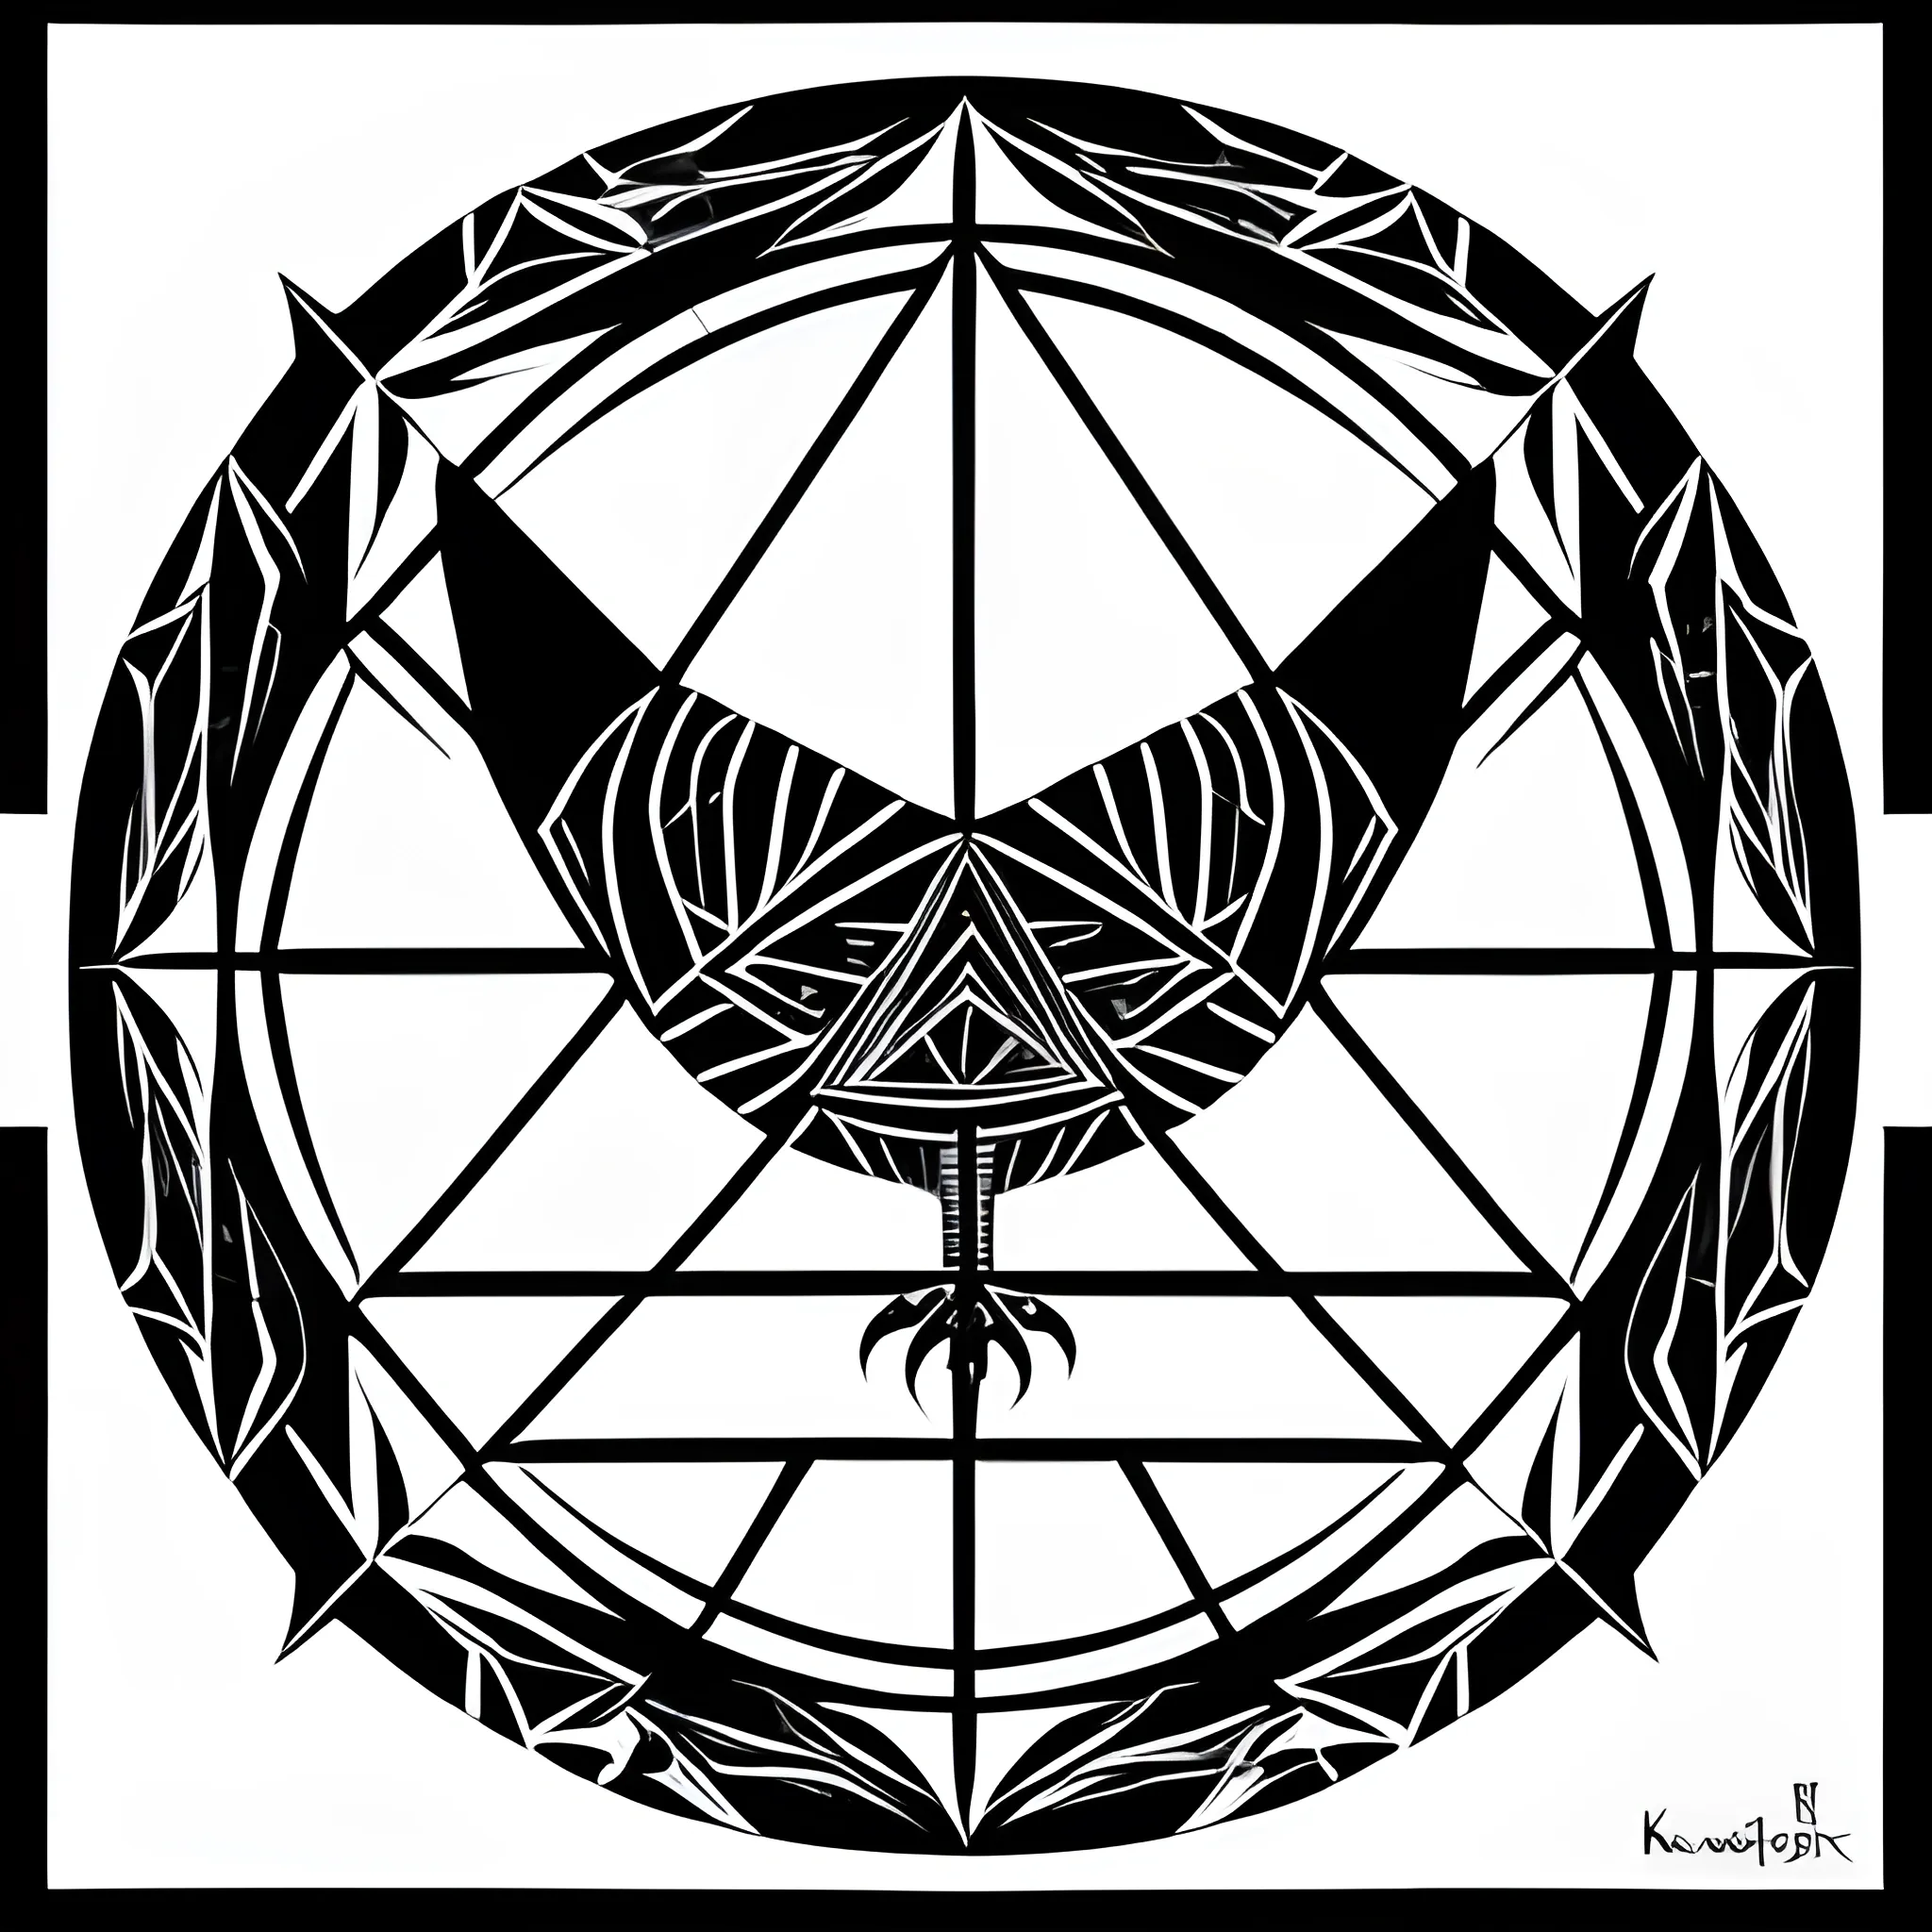 geometric bird symbol by karl gerstner, black and white, 8 k scan, negative space, clever, focused, hard line, satisfying, award winning , Pencil Sketch, Cartoon, Trippy, Water Color, Dark fantasy, concept art,perfect composition,extremely welldesigned, ultra hyperdetailed, Gothic vibes, tribal tattoo style, astral, complex, radiant, dark magical 